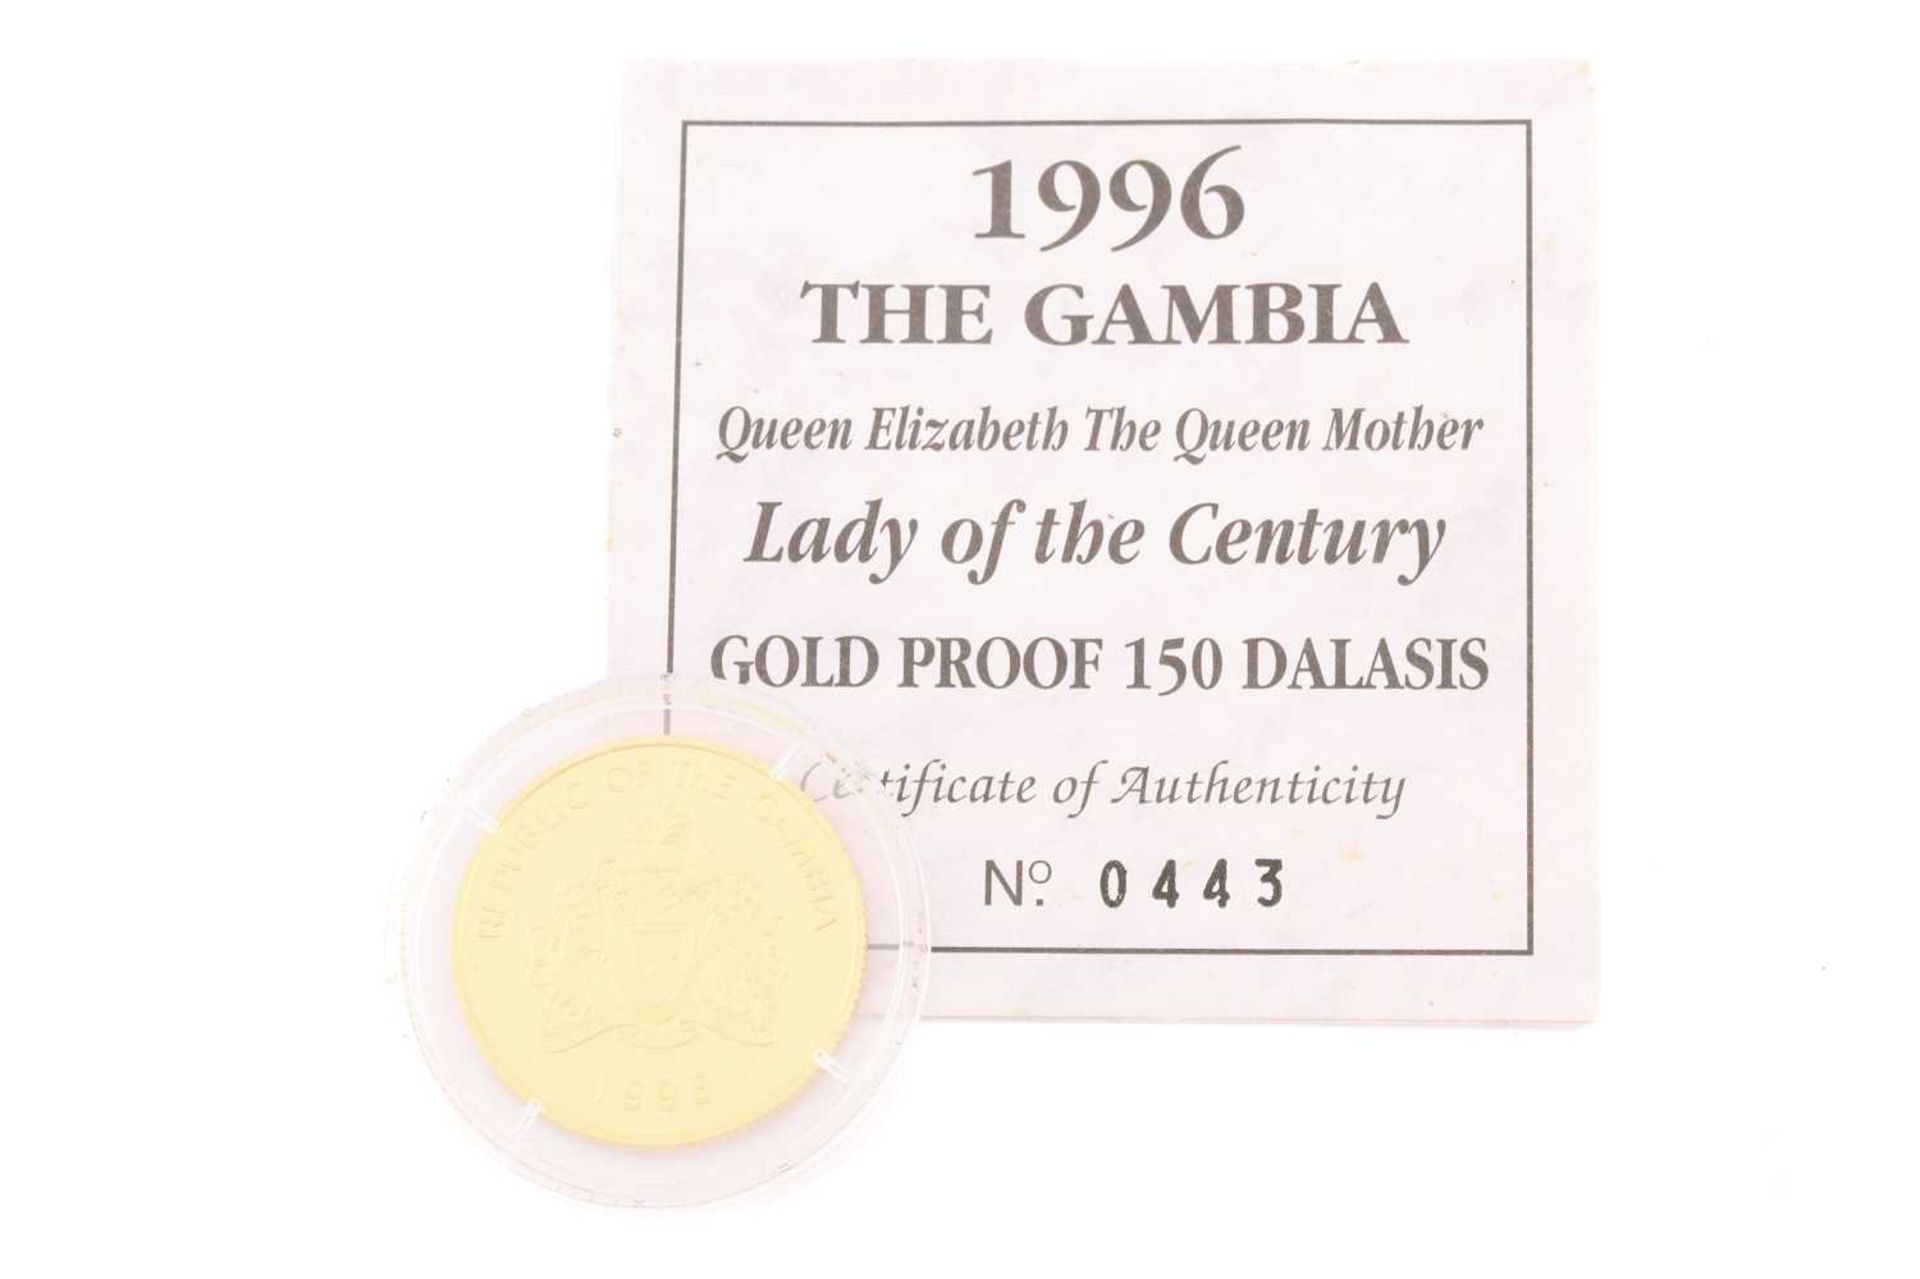 A Republic of Gambia 1996 Queen Mother, Lady of the Century 150 Dalasis coin, number 0443 of a - Image 10 of 11